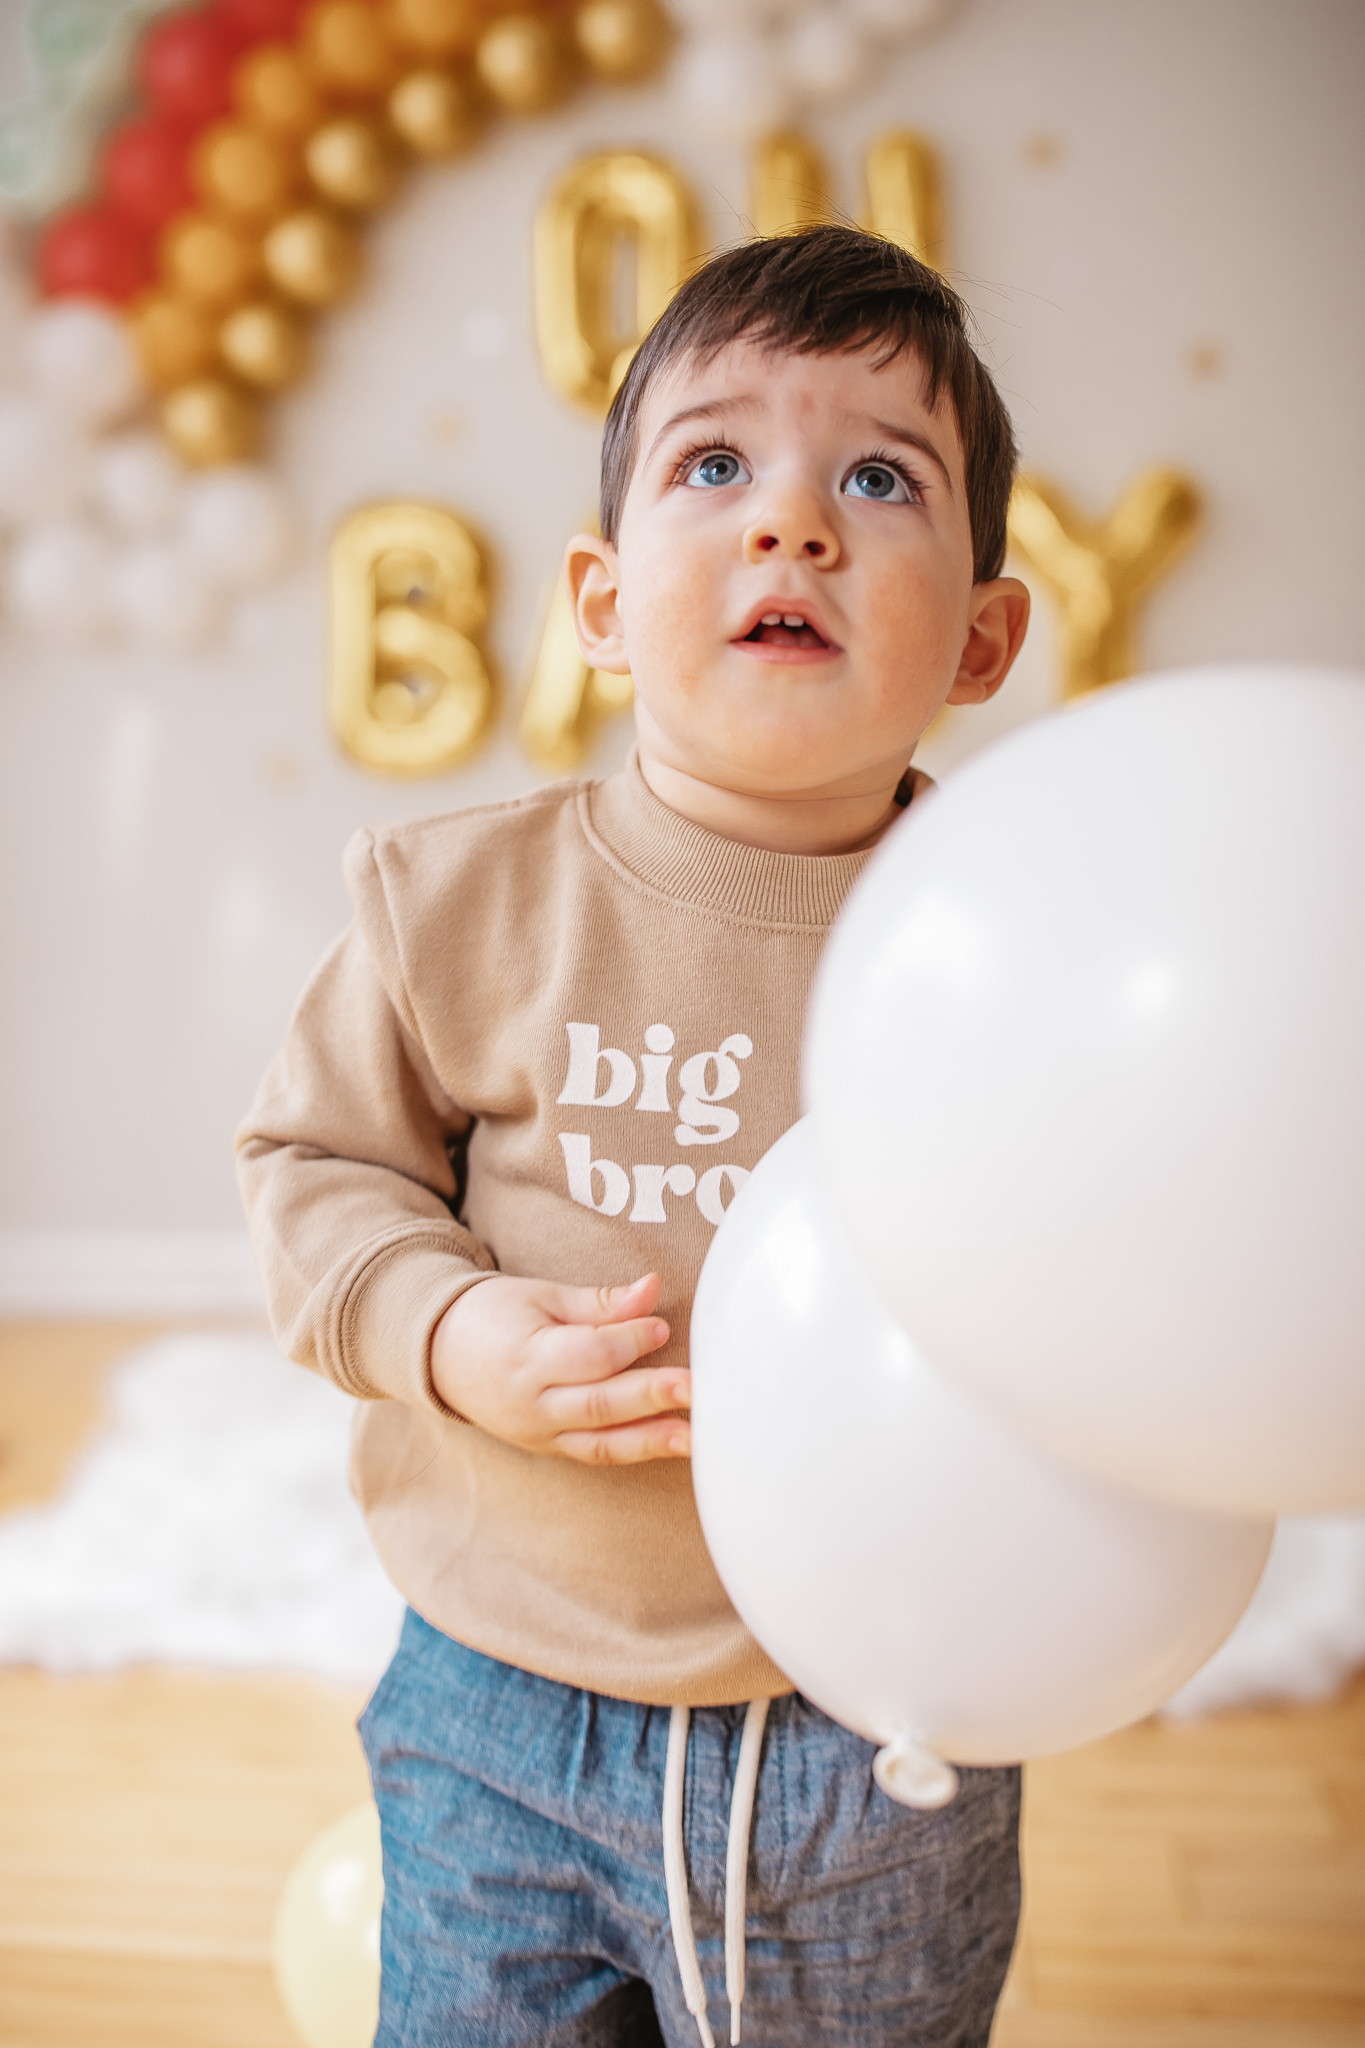 DIY Rainbow Baby Pregnancy Announcement. Big brother sweatshirt for toddlers. Rainbow baby balloon backdrop for photos.